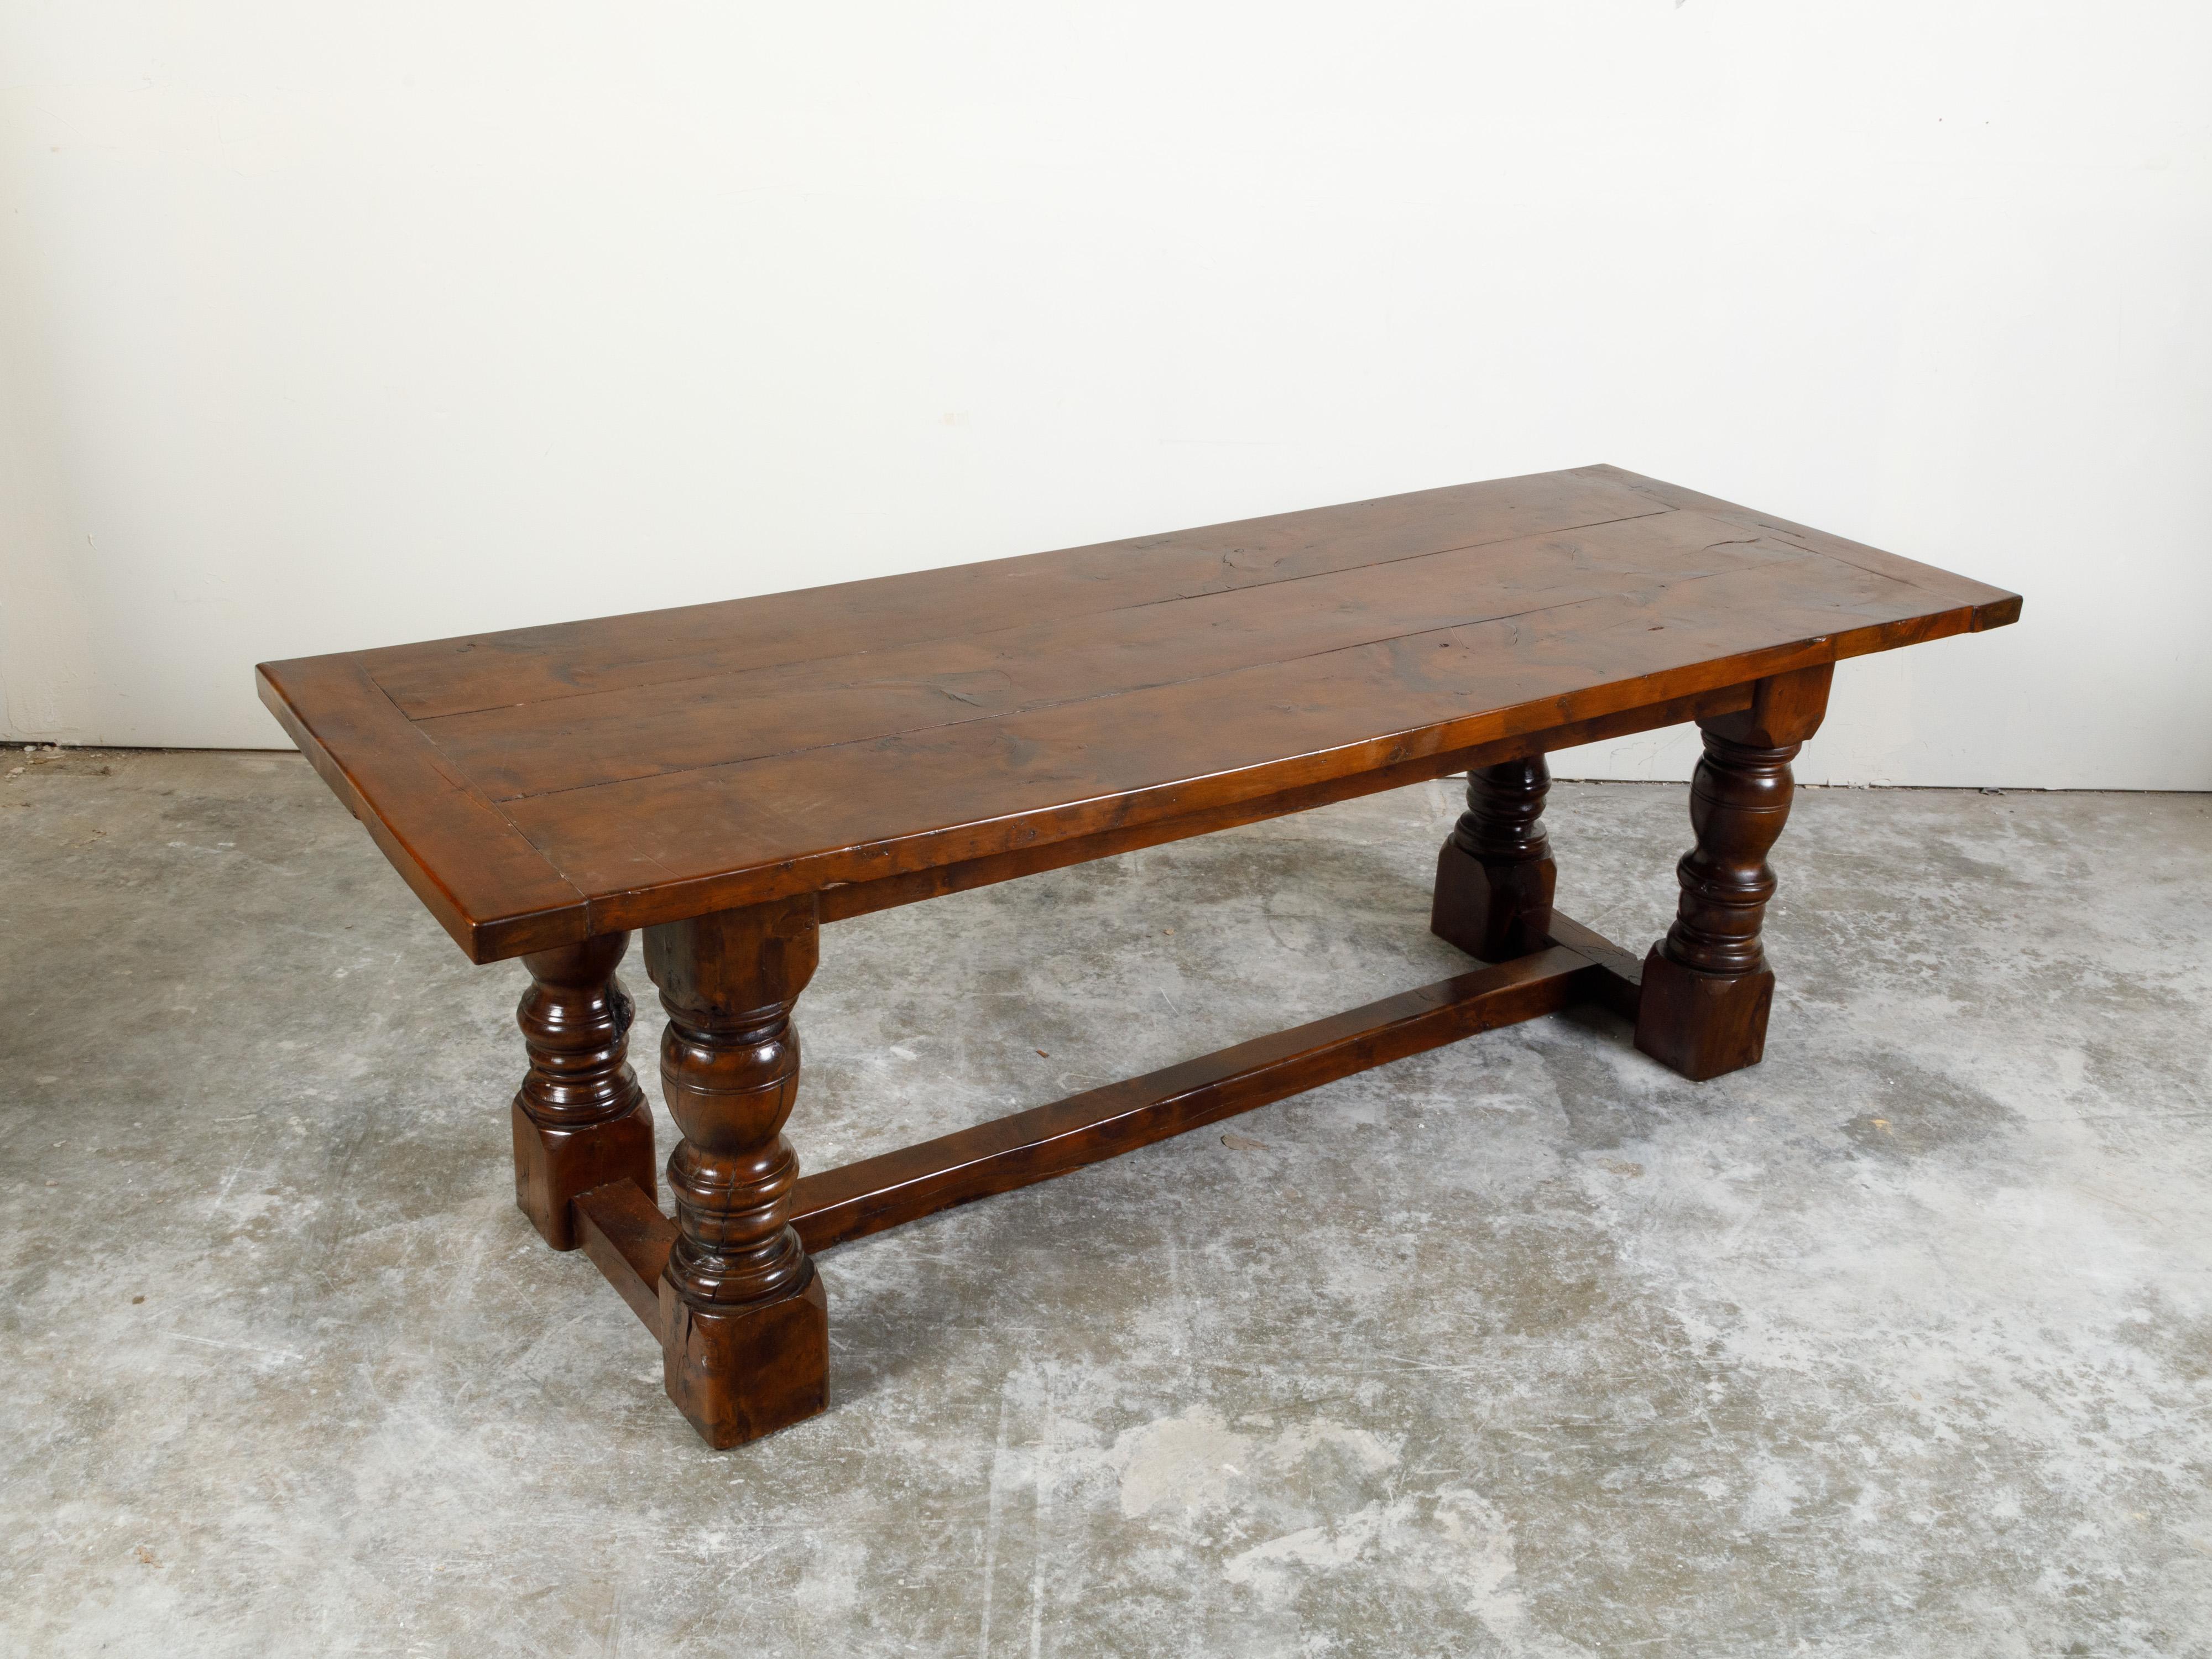 English 19th Century Walnut Dining Table with Turned Legs and H-Form Stretcher For Sale 1